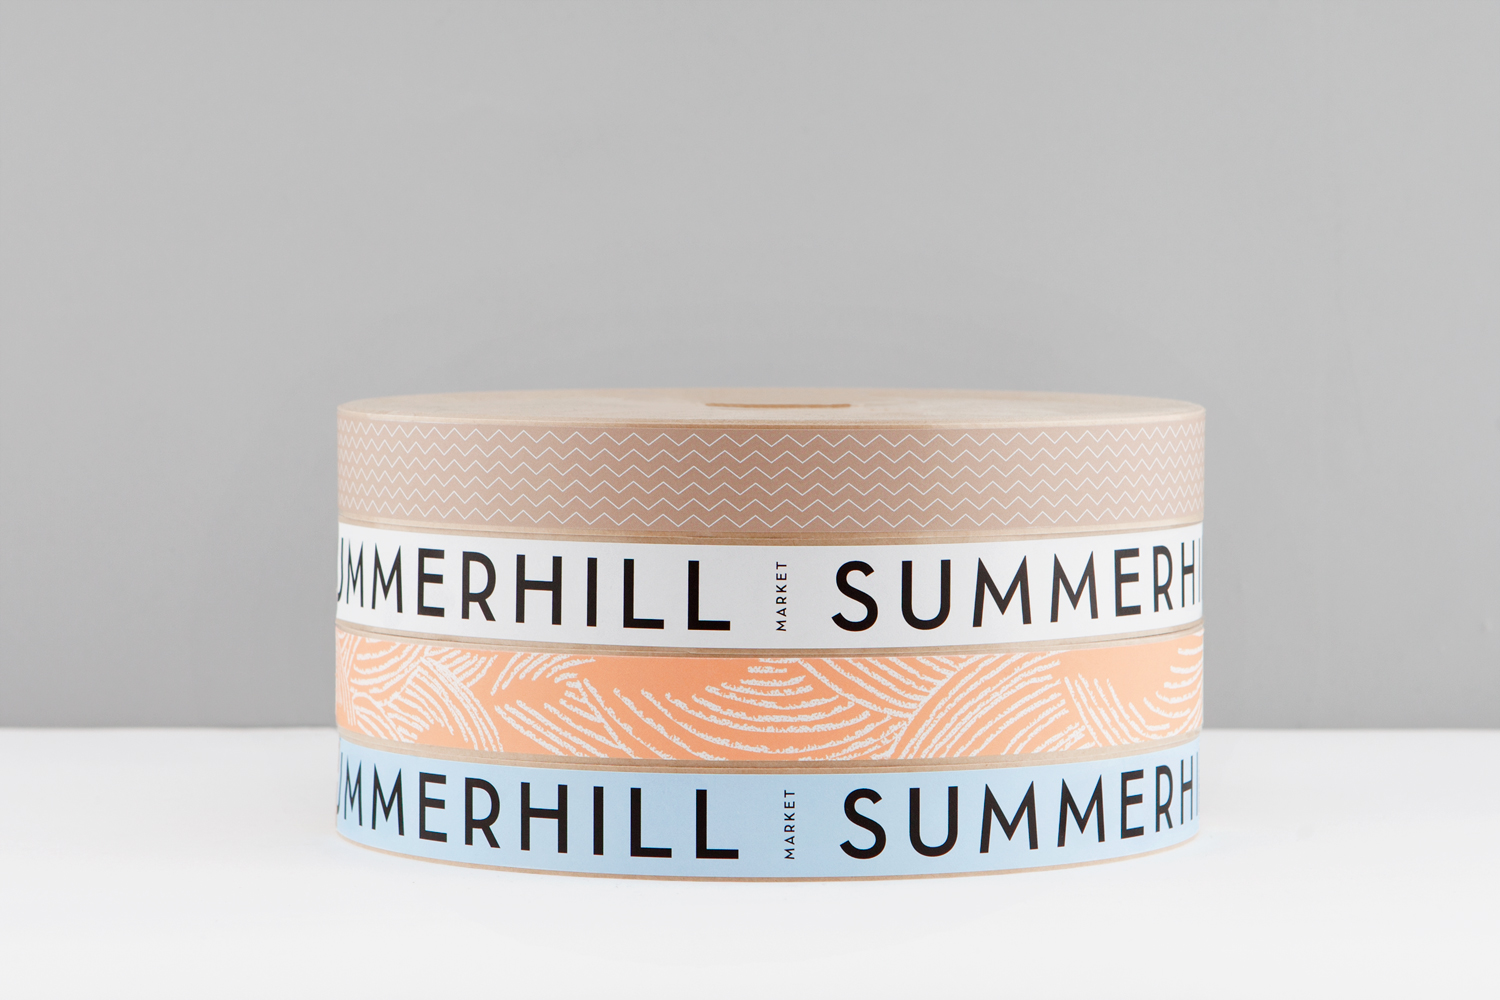 Branded adhesive tape designed by Canadian studio Blok for Toronto based boutique grocery store Summerhill Market